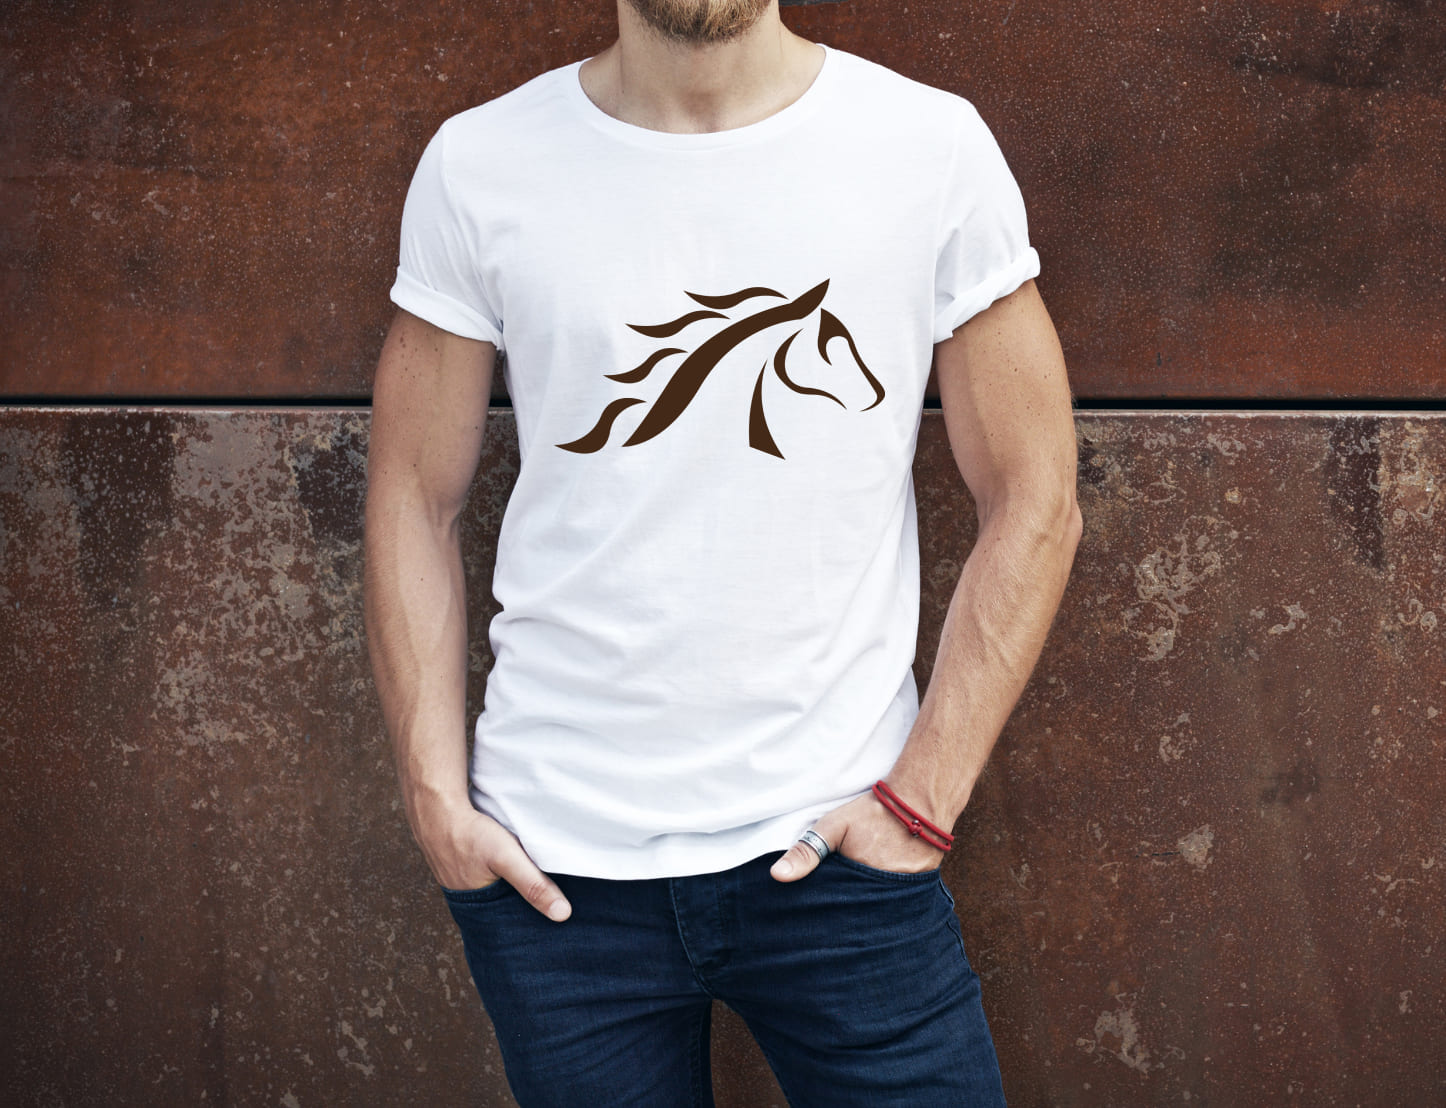 White t-shirt with a black and white horse head on a man.